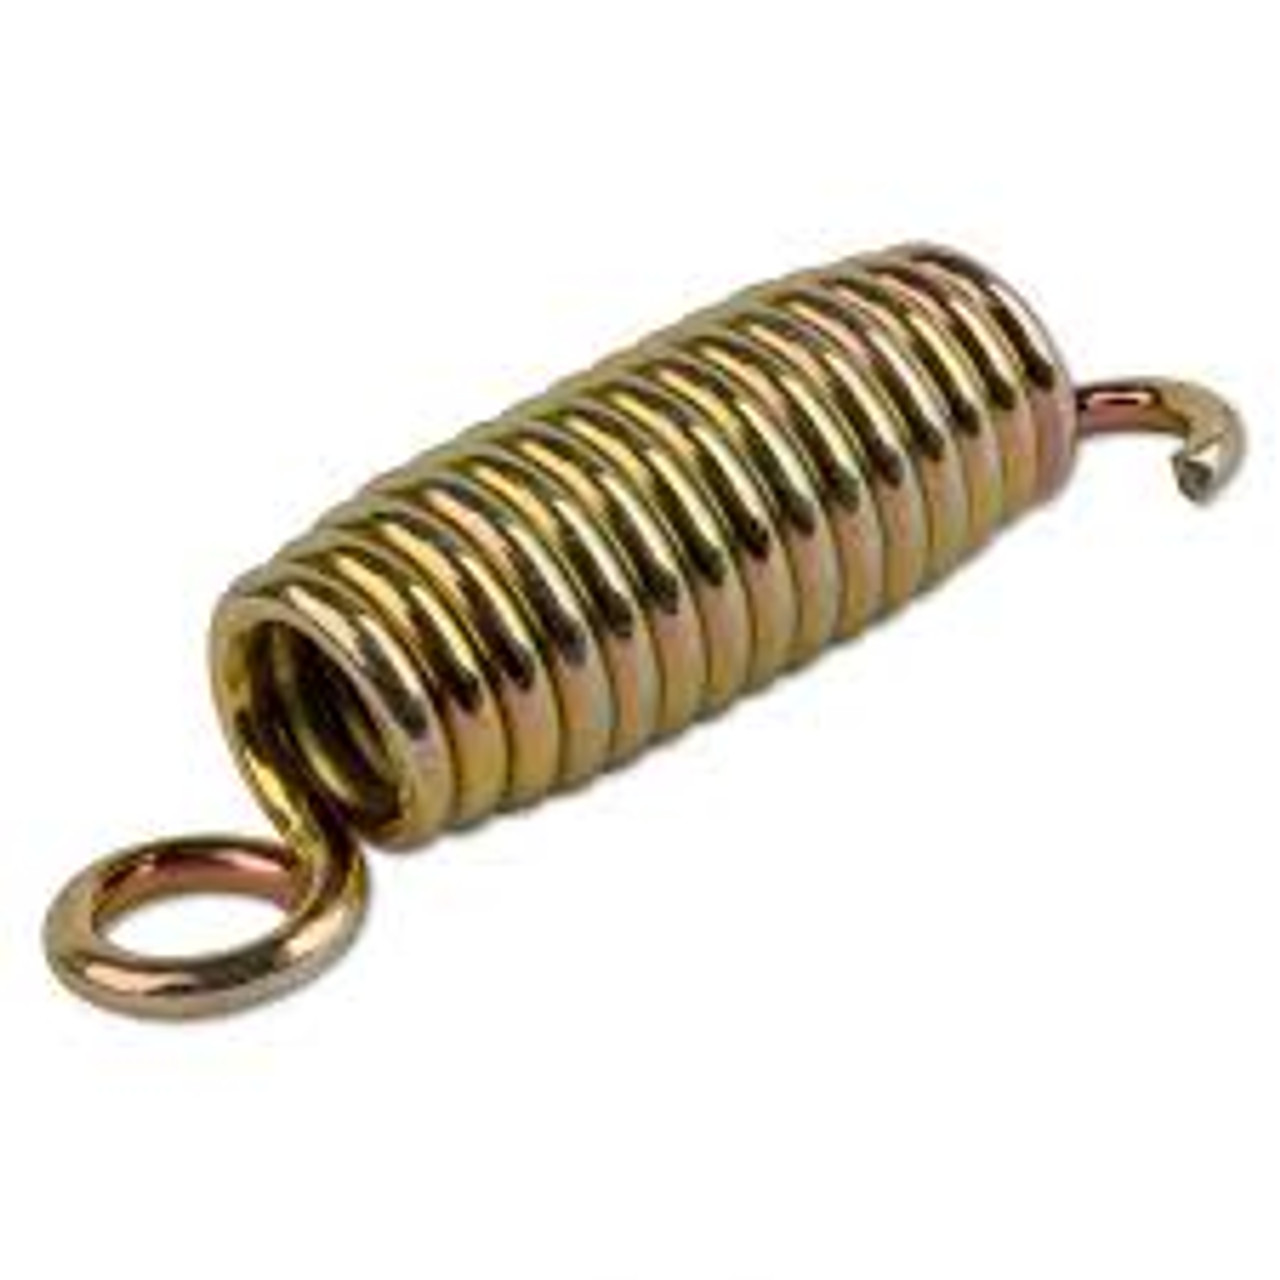 Picture: Replacement spring for Jameson JA-14 Spring.